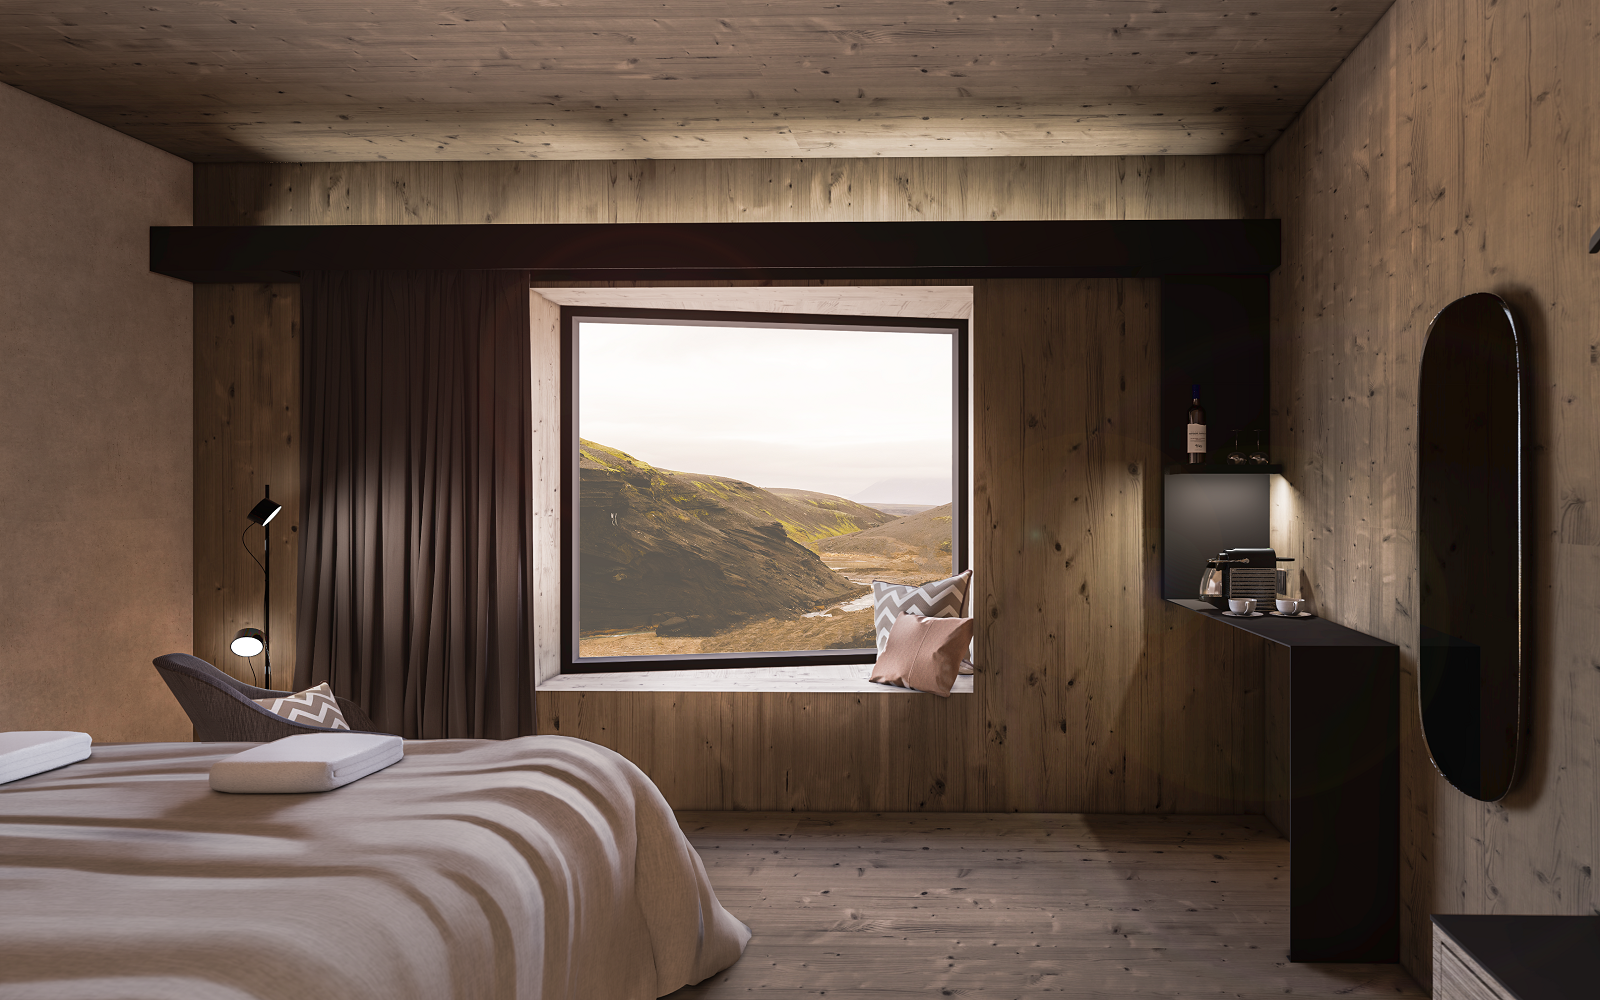 icelandic view framed by square window with natural wood clad surfaces